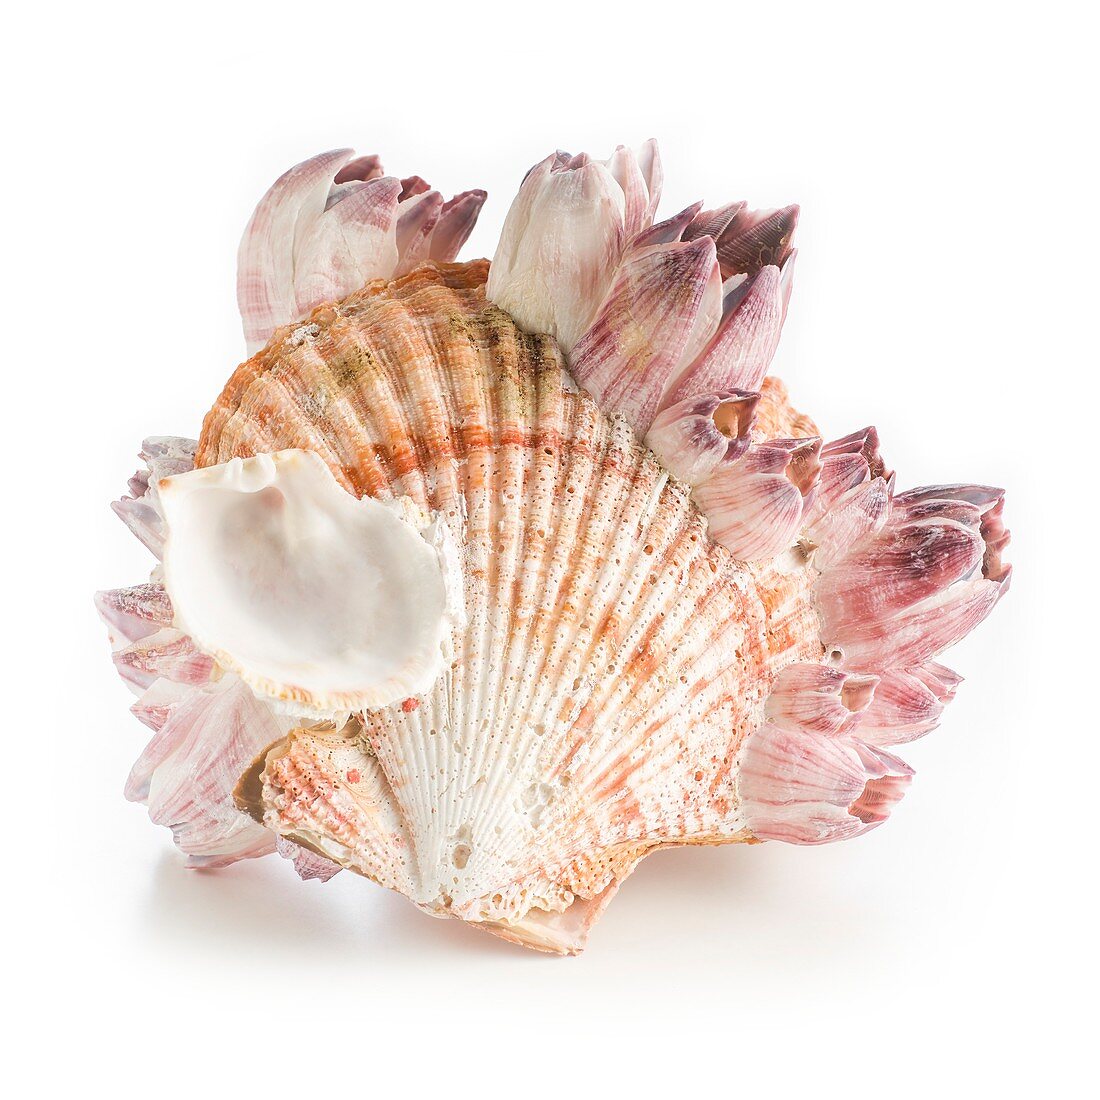 Scallop shell and barnacles